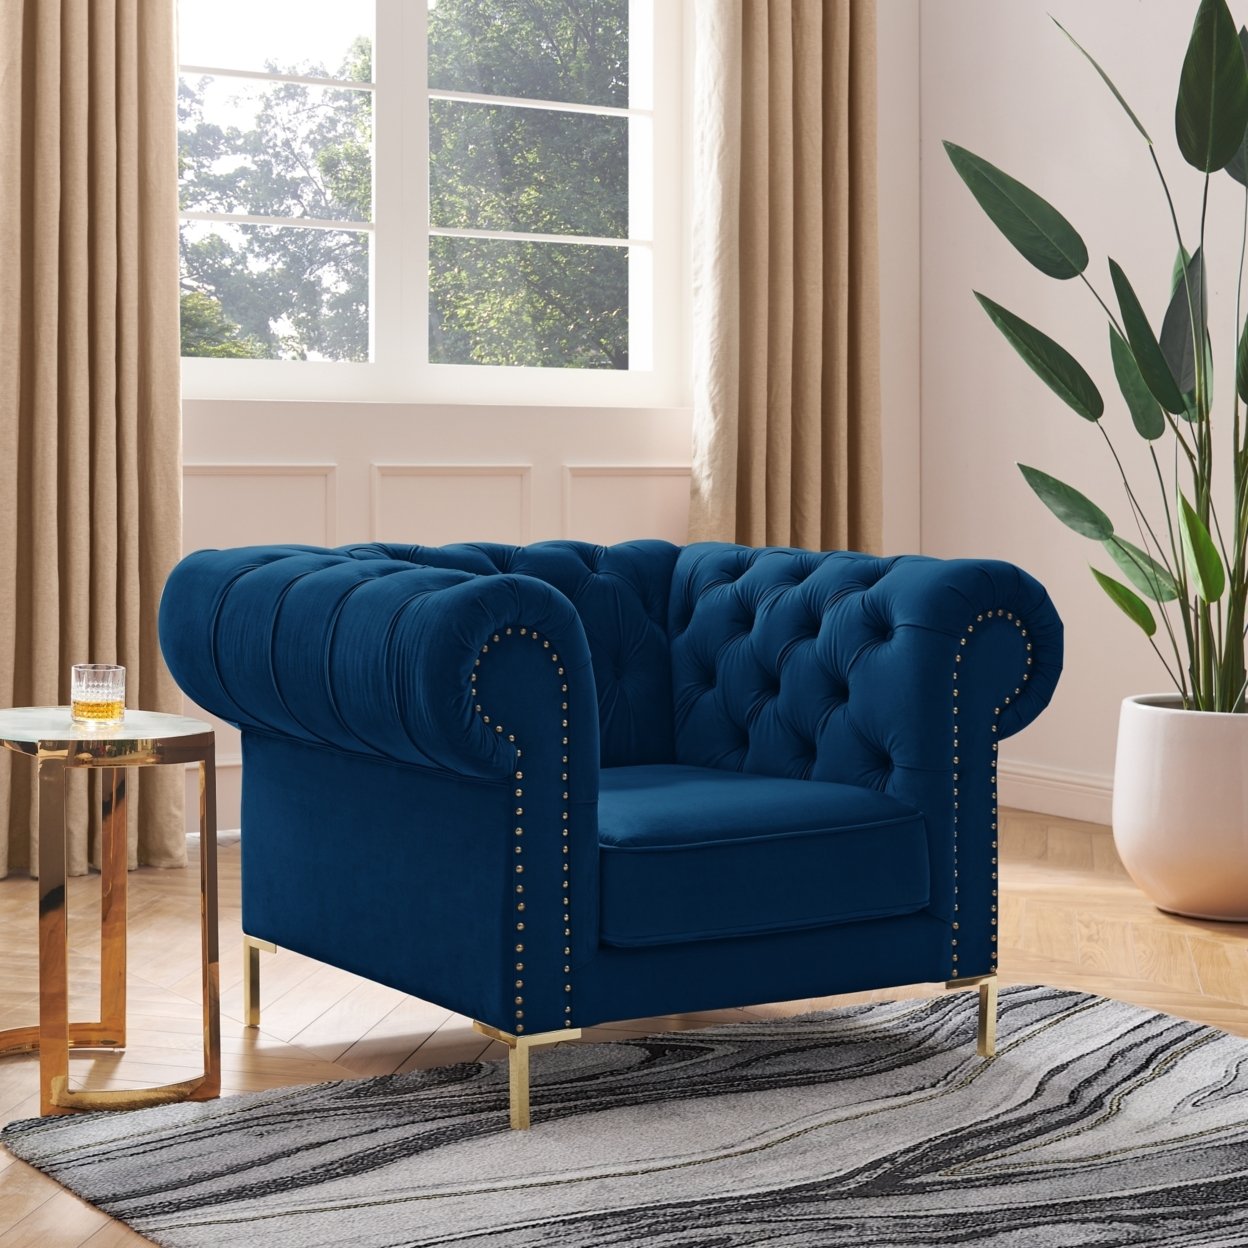 Abrianna Club Chair-Button Tufted-Gold Nailhead Trim, Sinuous Springs-Rolled Arms, Y-leg - navy - navy blue